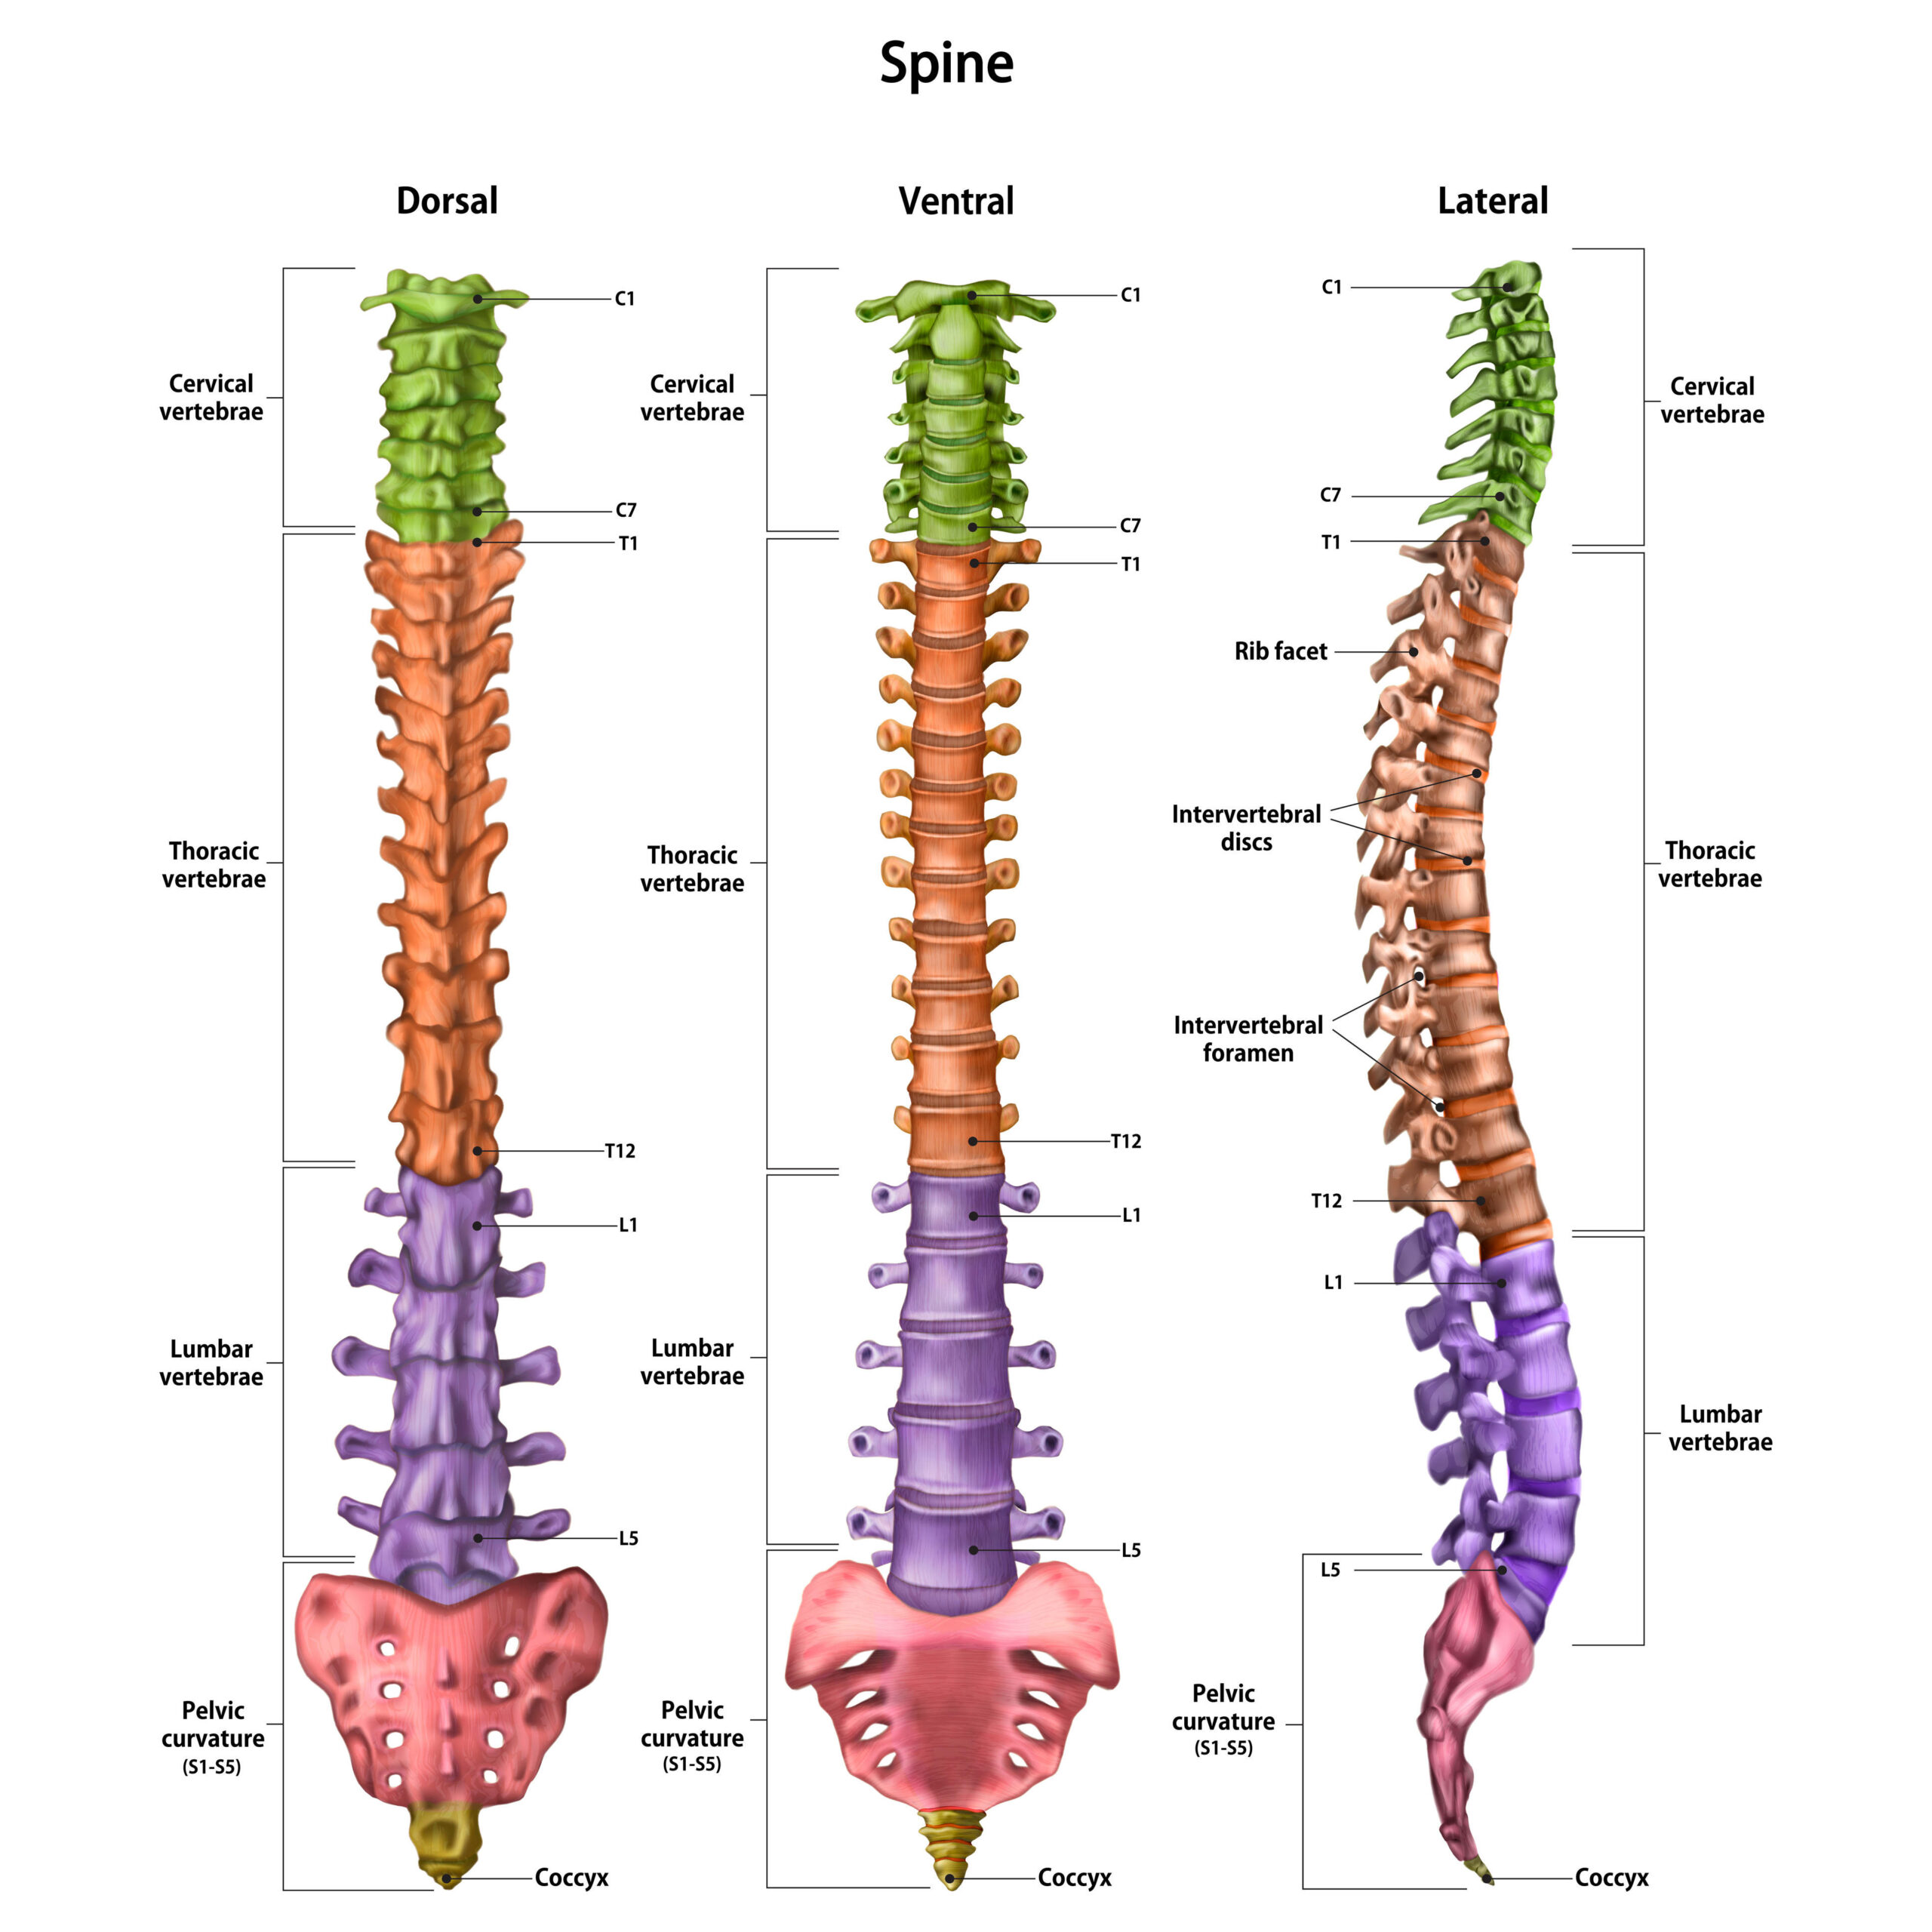 The human spine (vertebral column) with the name and description of all sites. Dorsal, lateral, ventral sides. Human anatomy. Vector illustration isolated on white background.